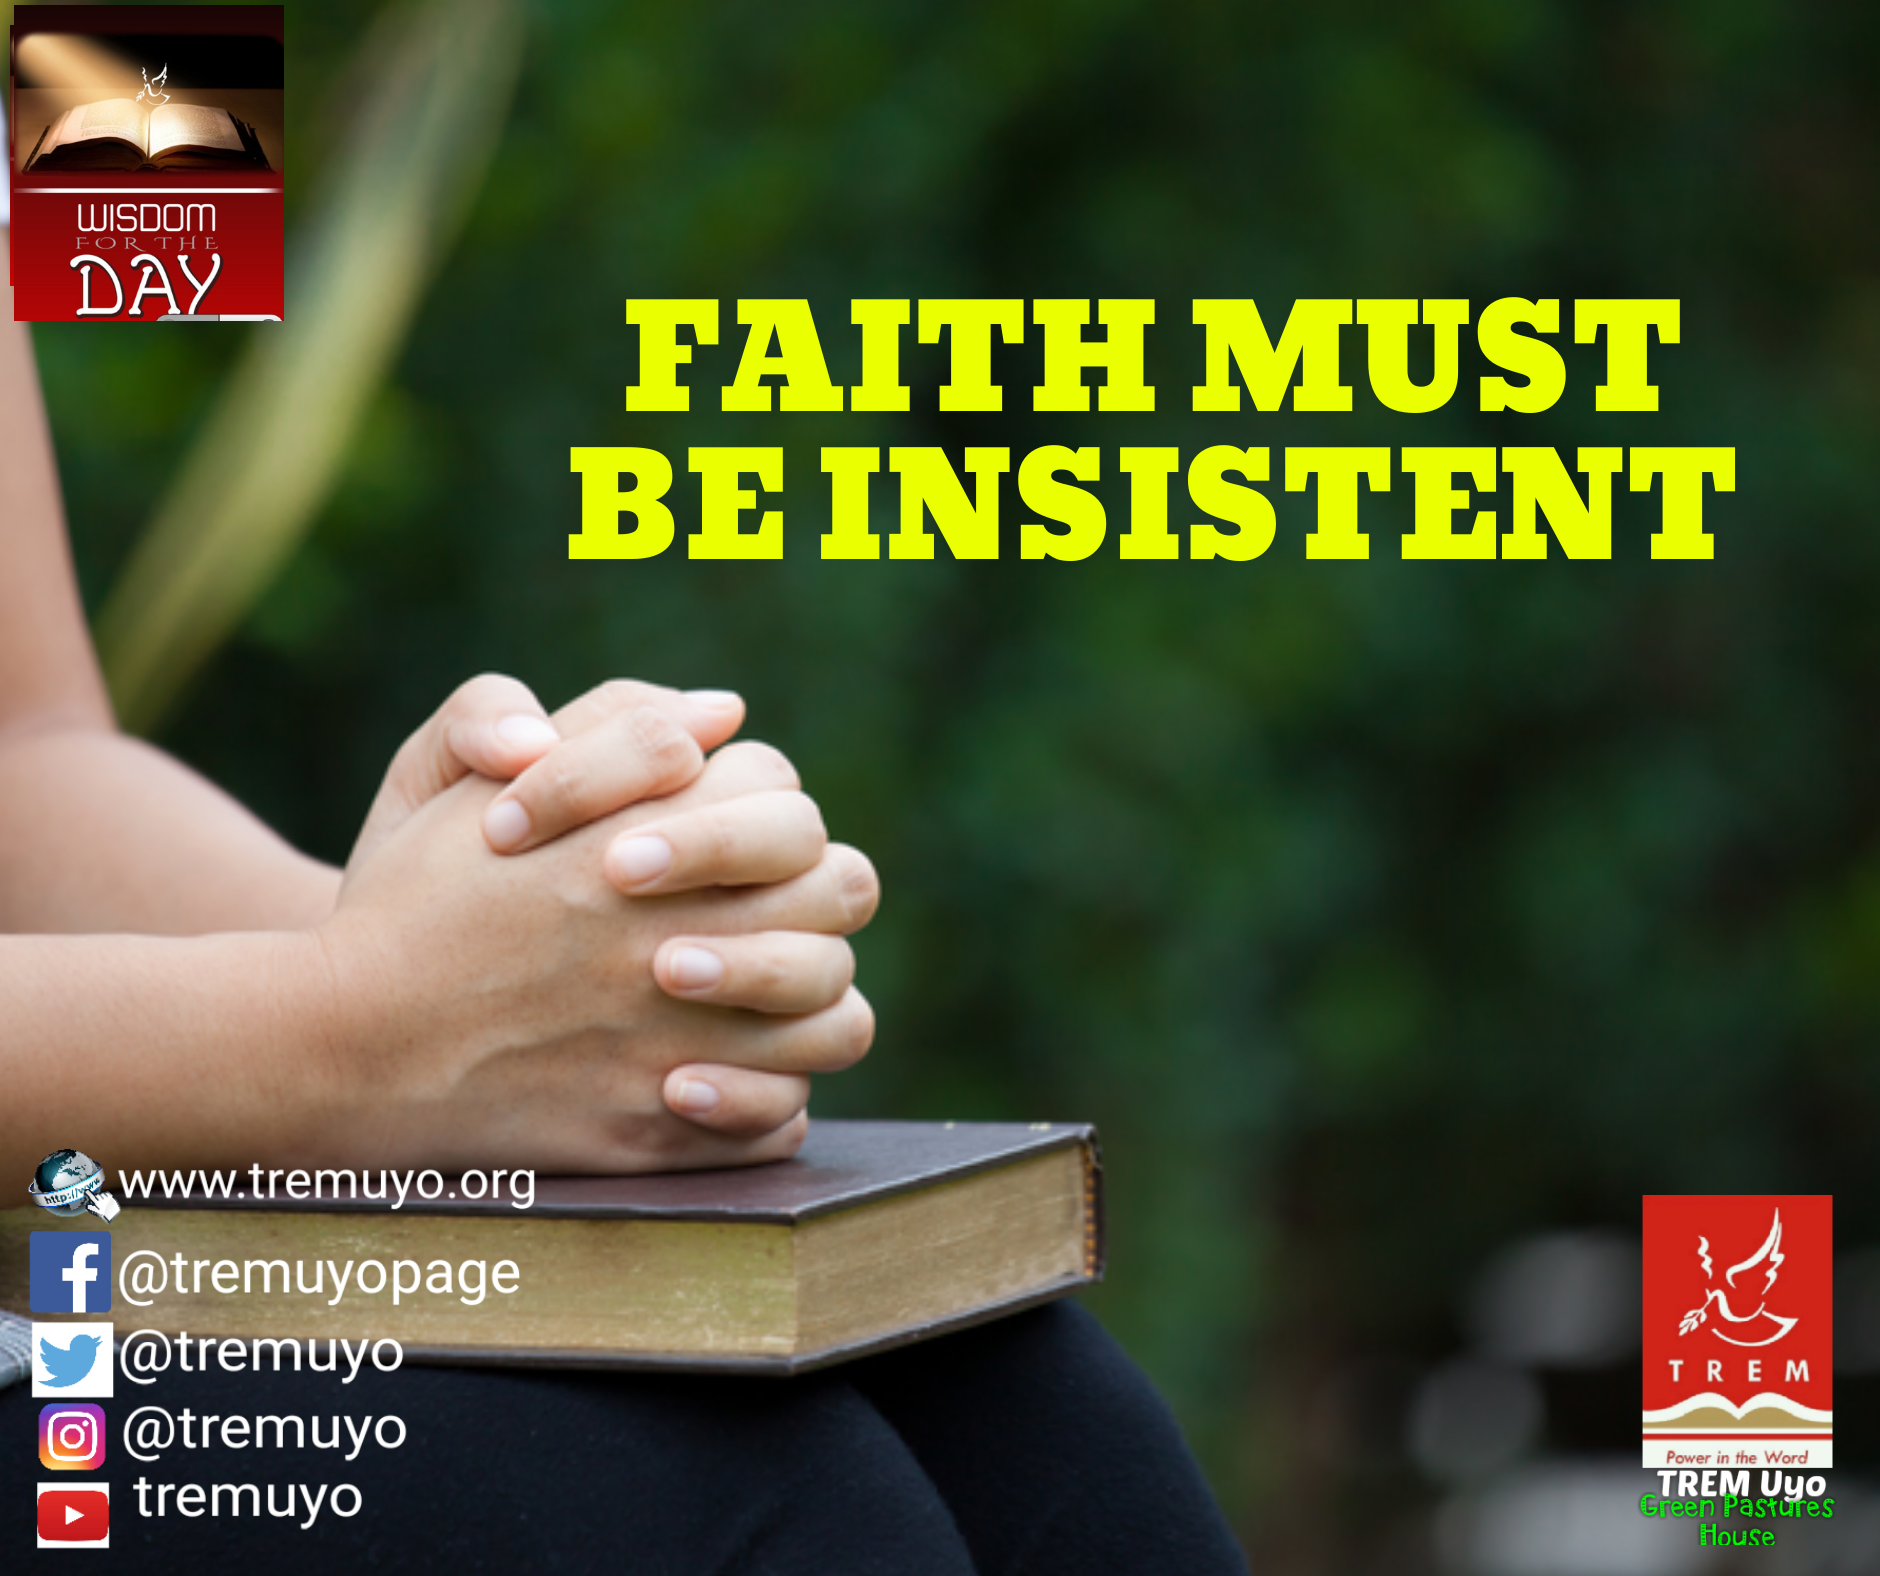 FAITH MUST BE INSISTENT